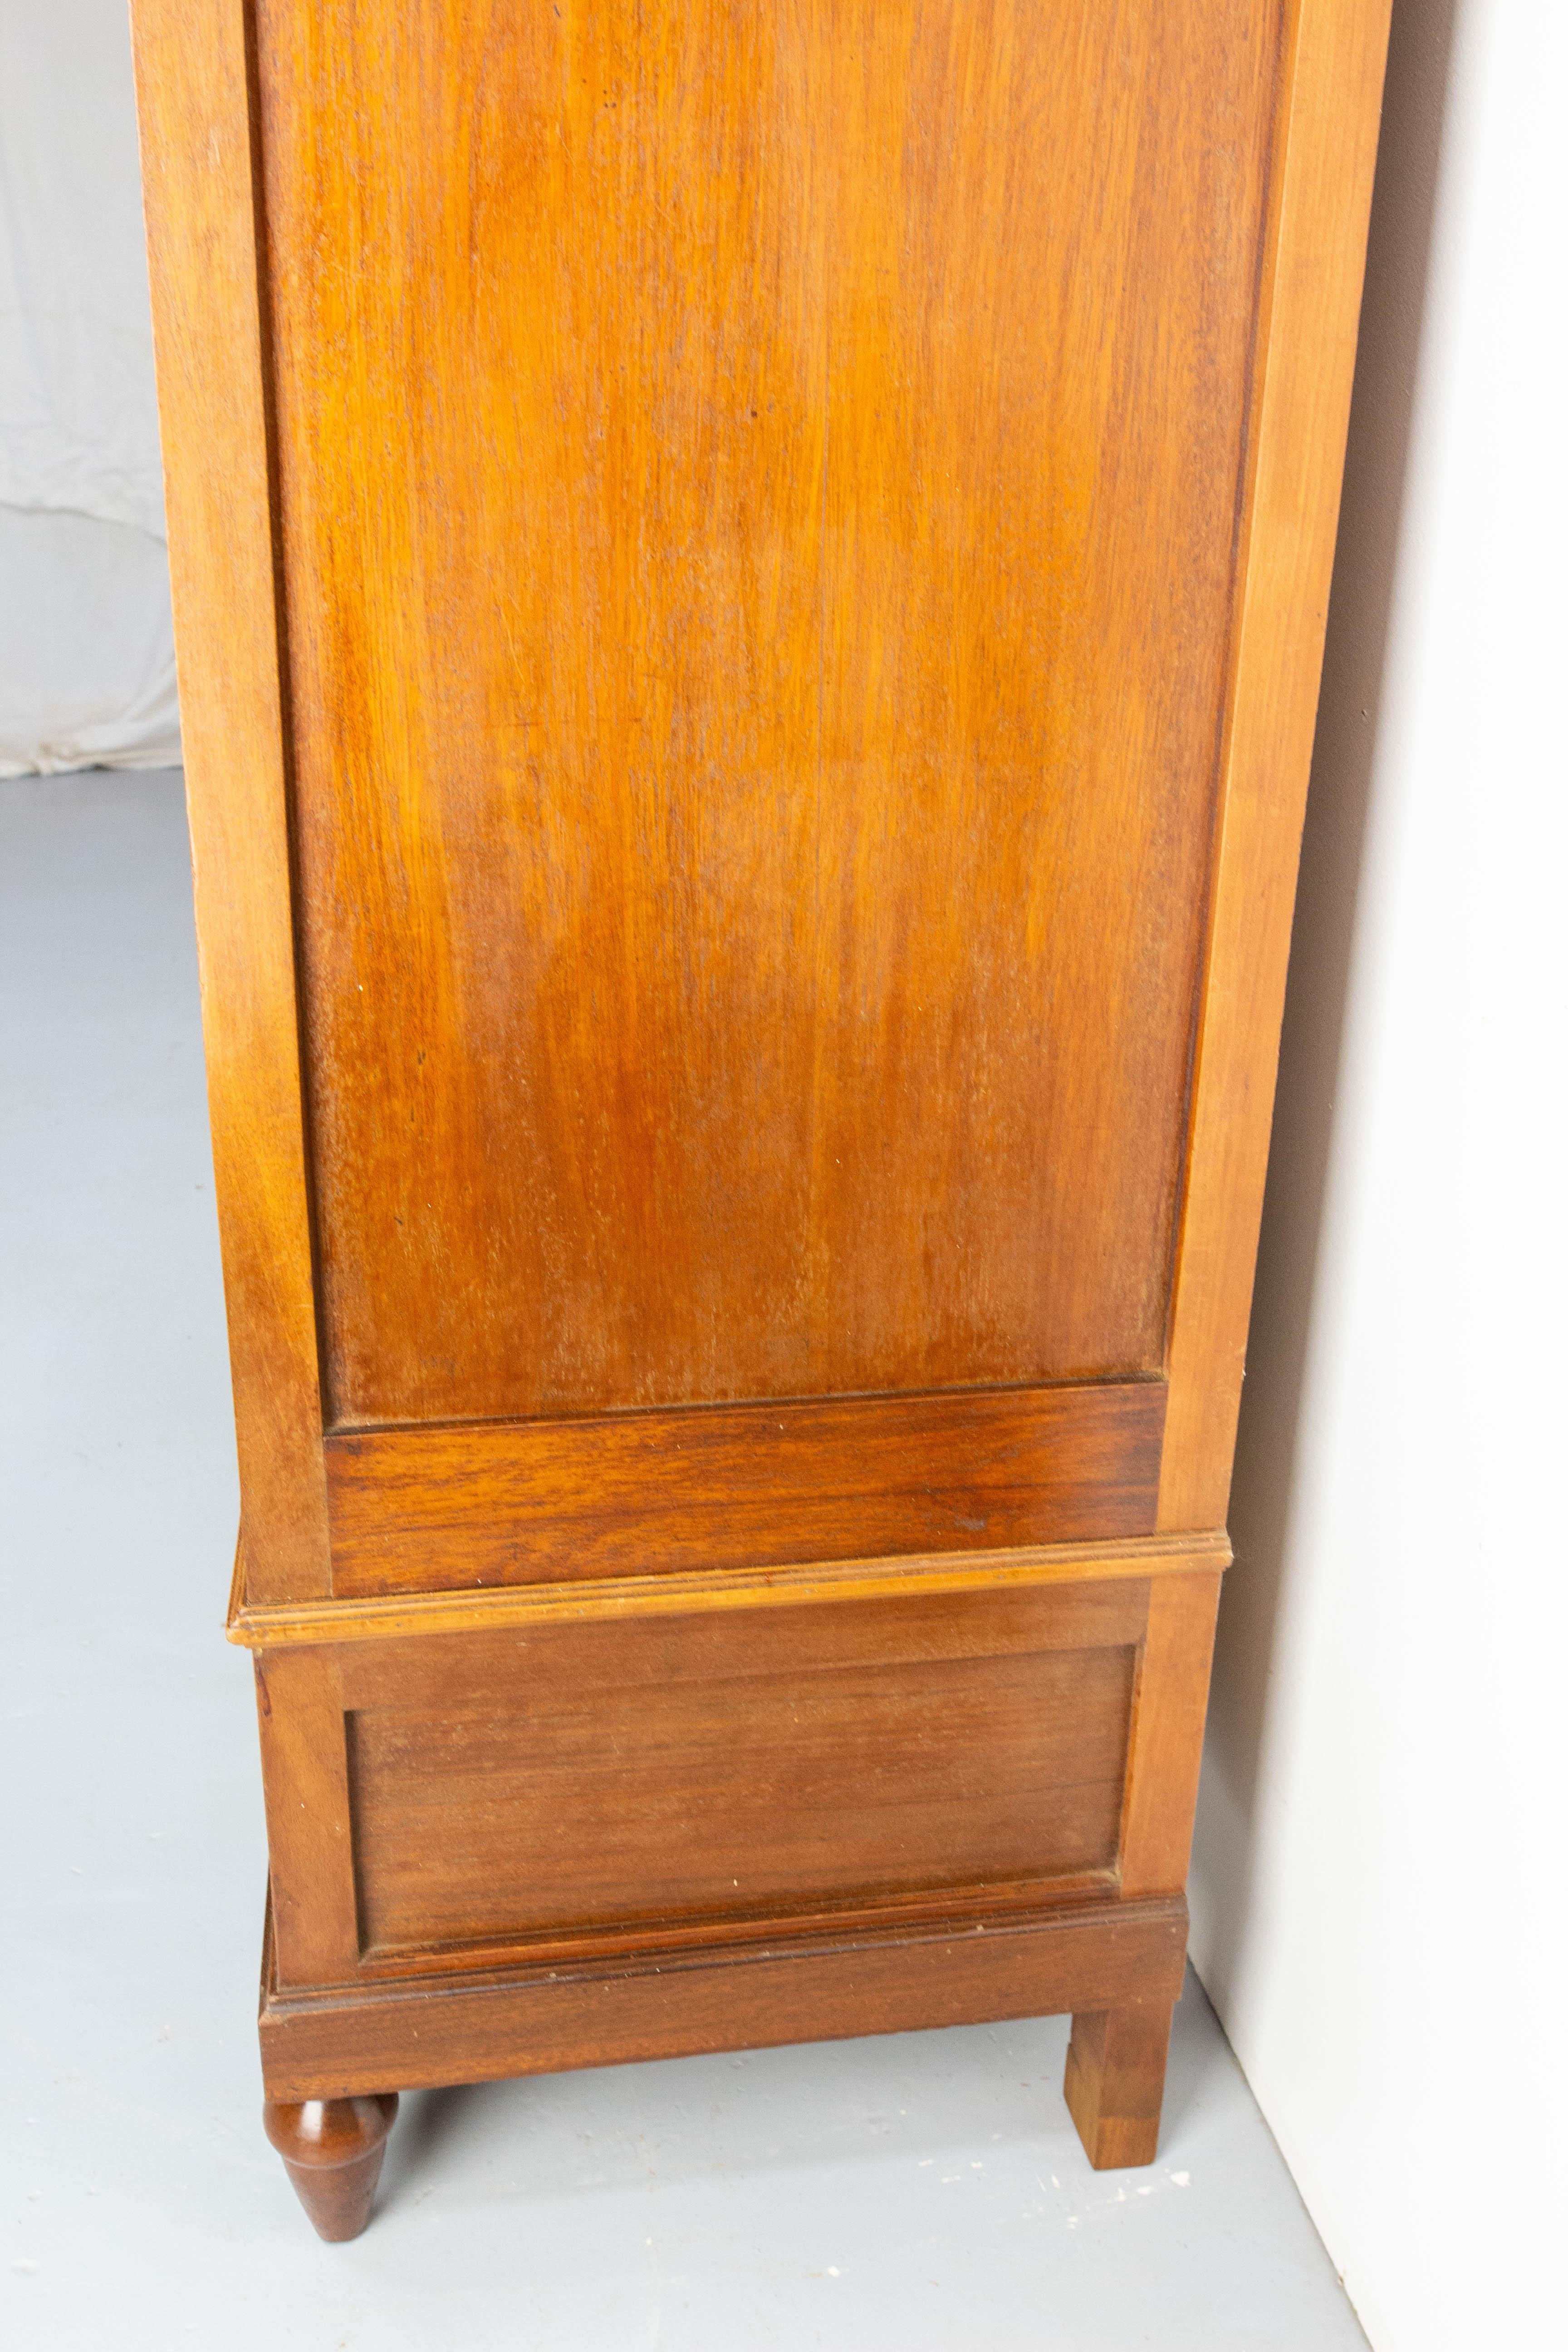 French Iroko Armoire with Beveled Mirrors in the Louis 16 Revival Style, 1900 For Sale 10